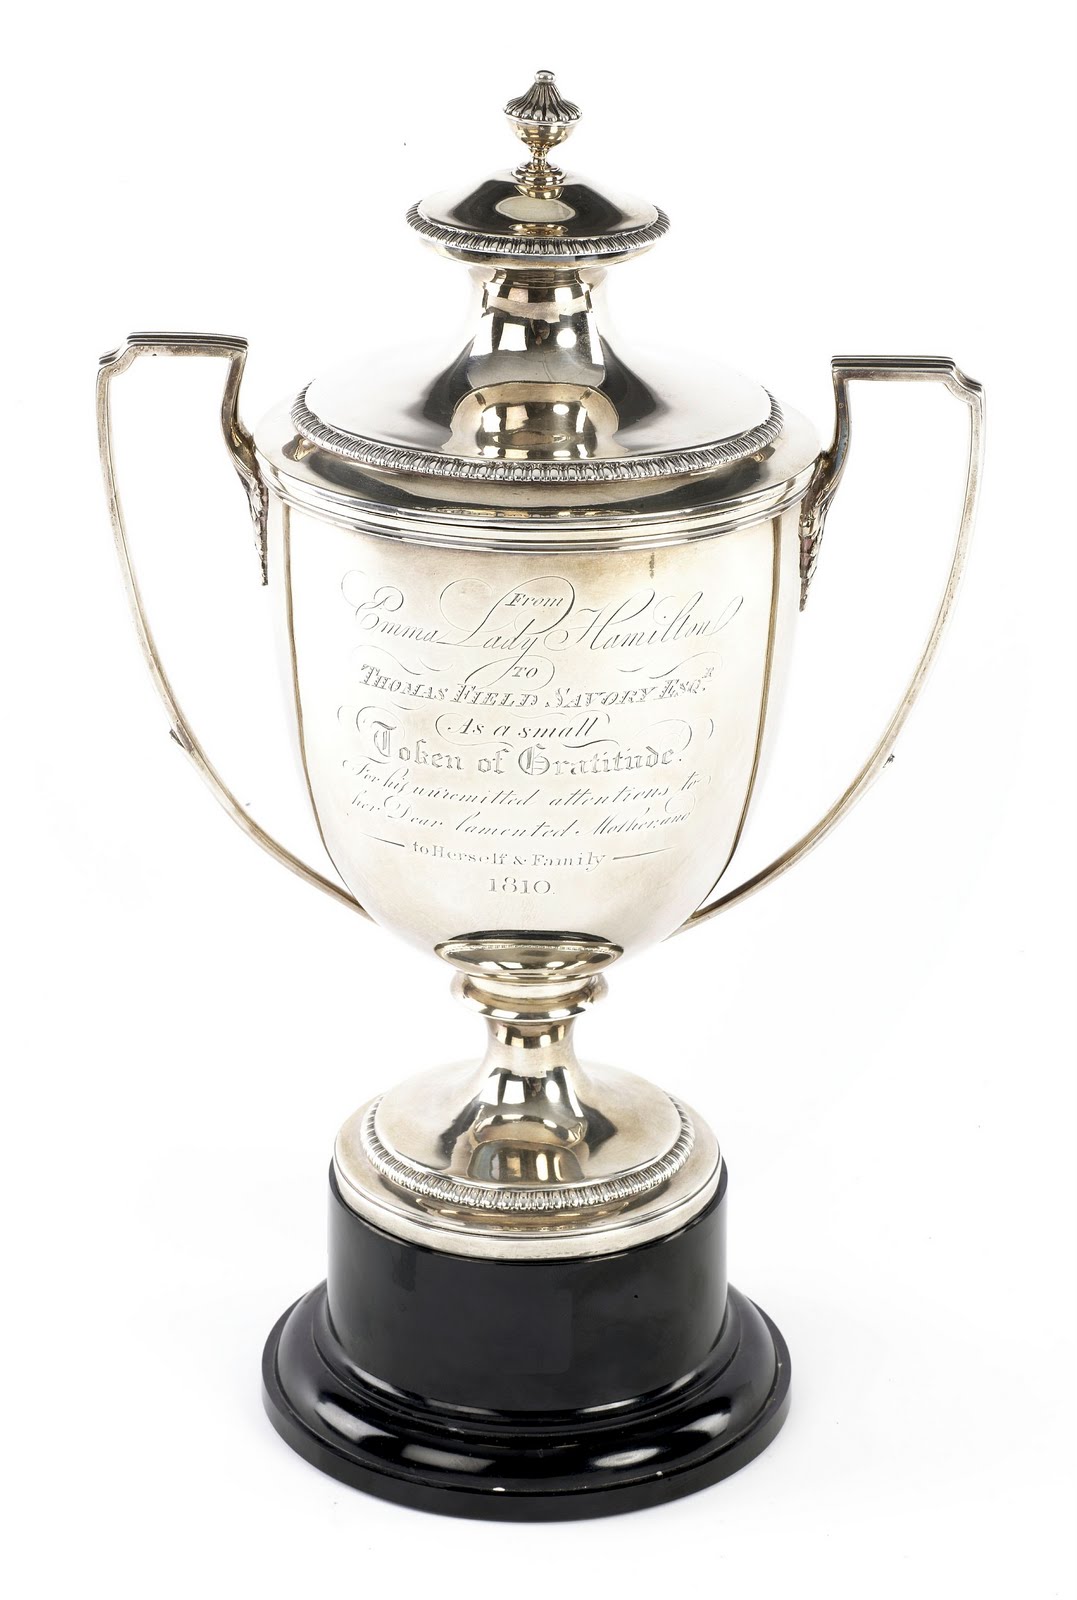 [A+George+lll+Silver+cup+and+cover,+Lady+Hamilton+1810.jpg]